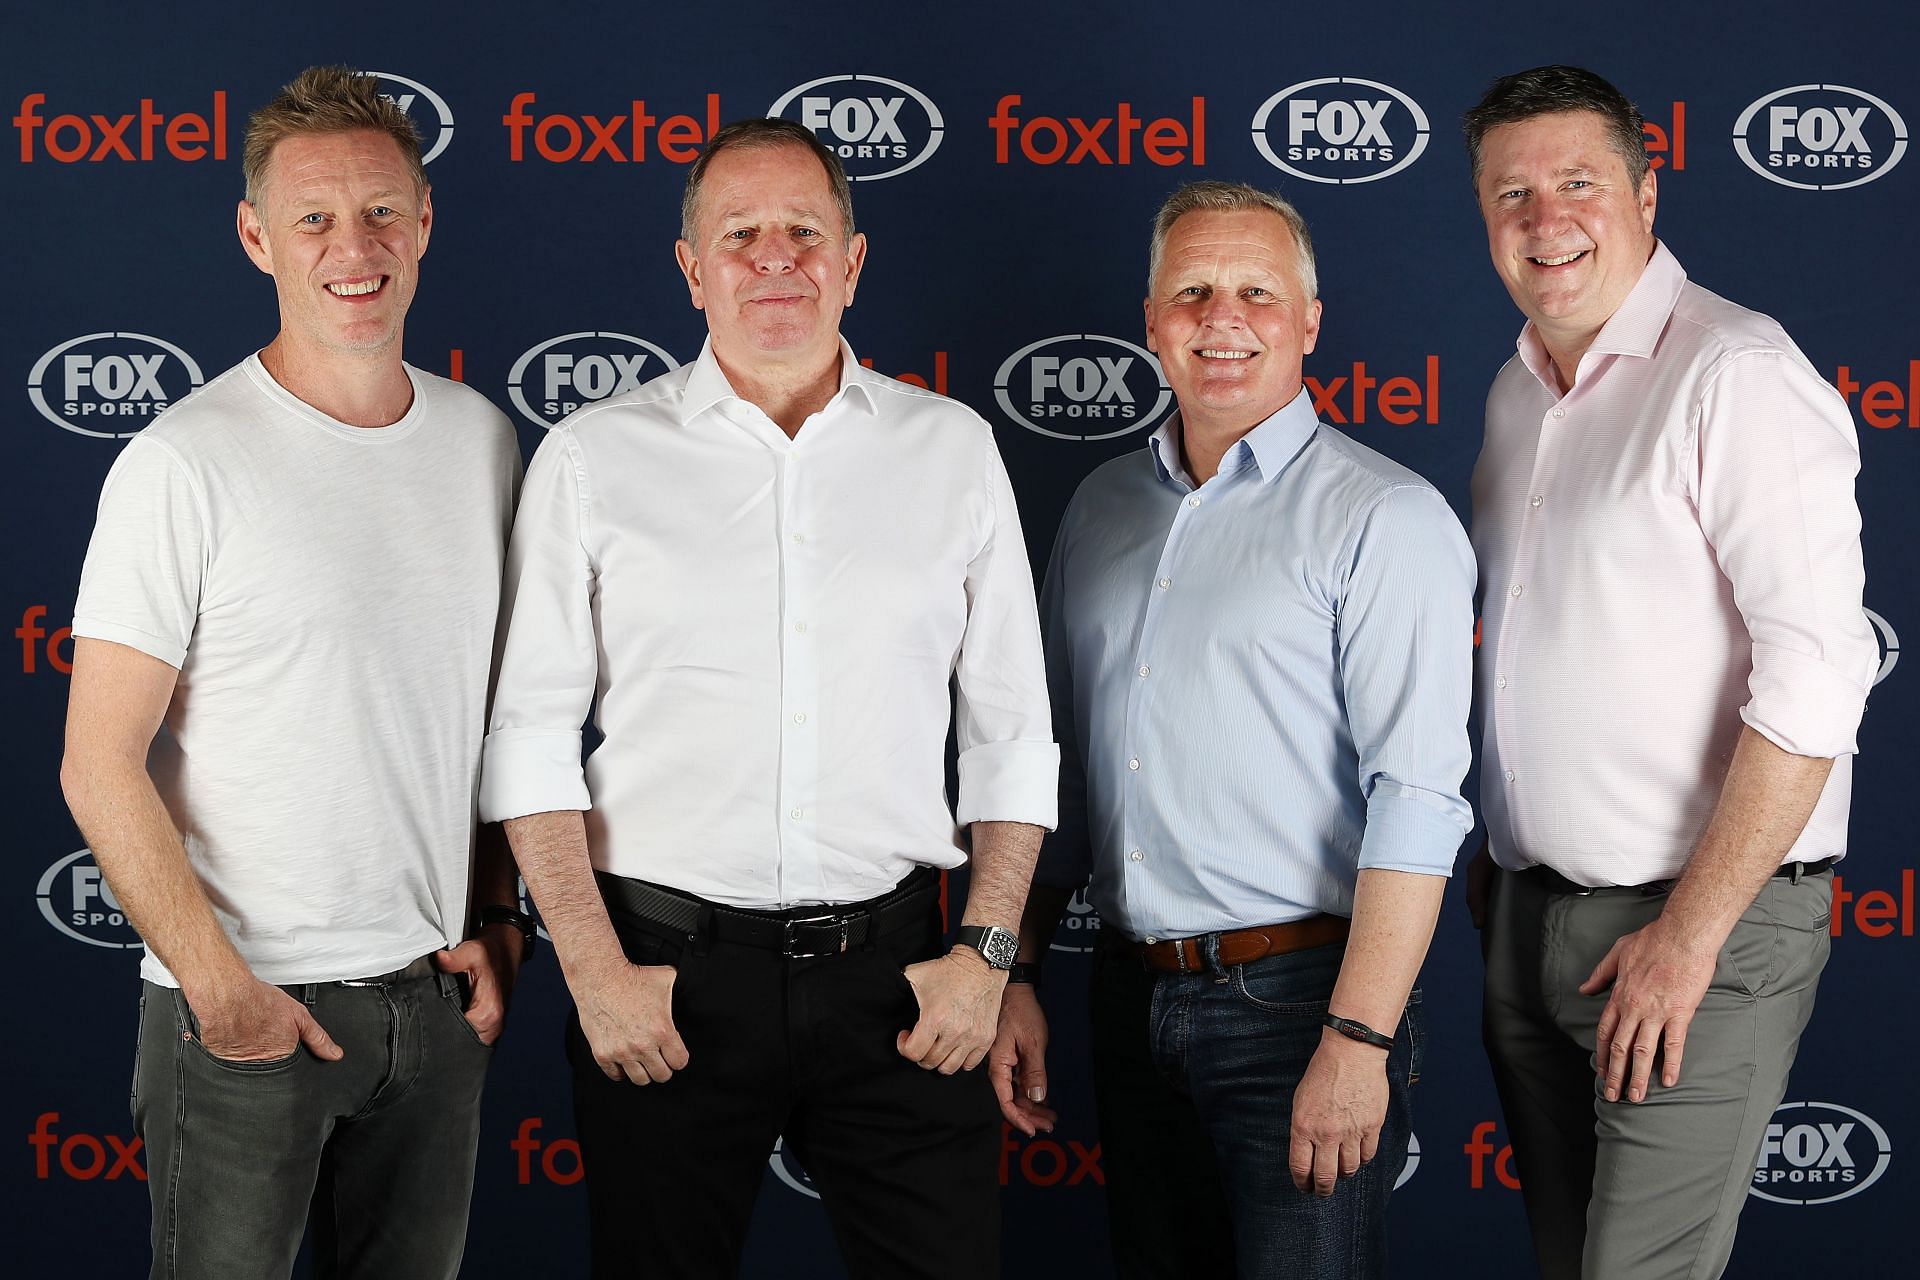 Sky Sports F1 pundits Simon Lazenby, Martin Brundle, Johnny Herbert and David Croft pose for a portrait. (Photo by Jack Thomas/Getty Images for Fox Sports)